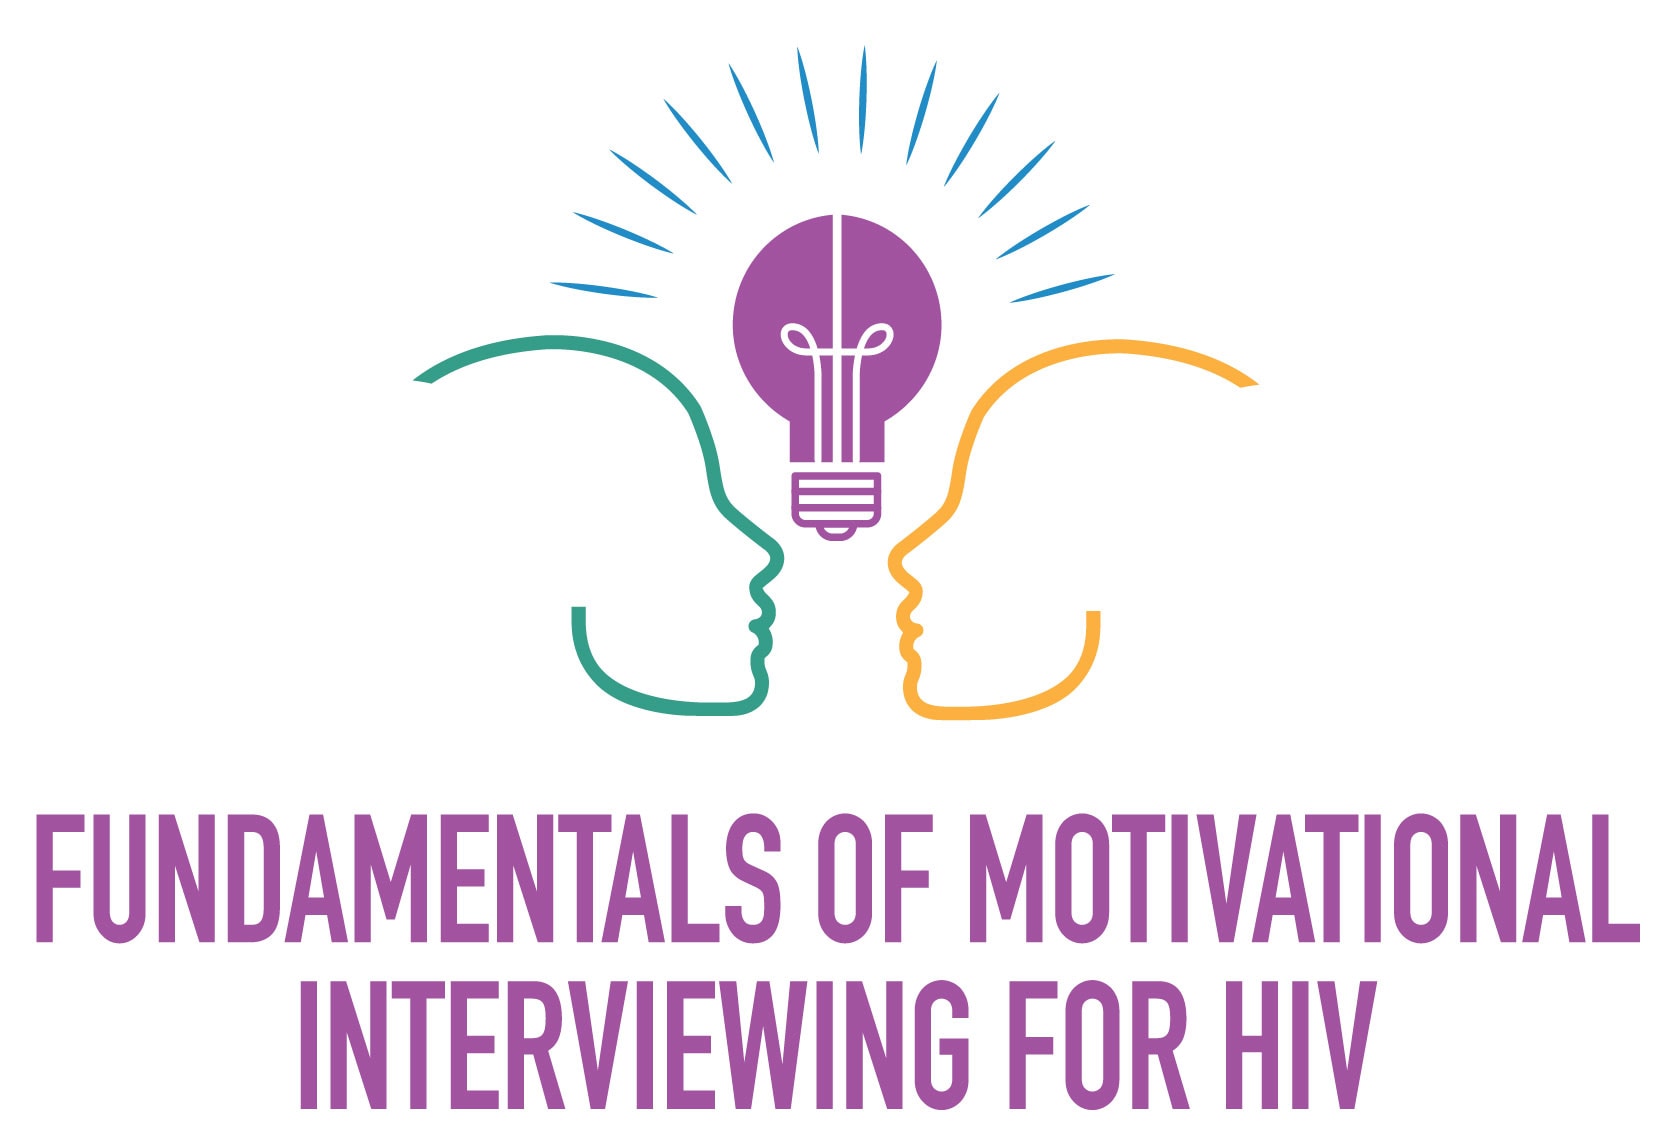 Fundamentals of Motivational Interviewing for HIV